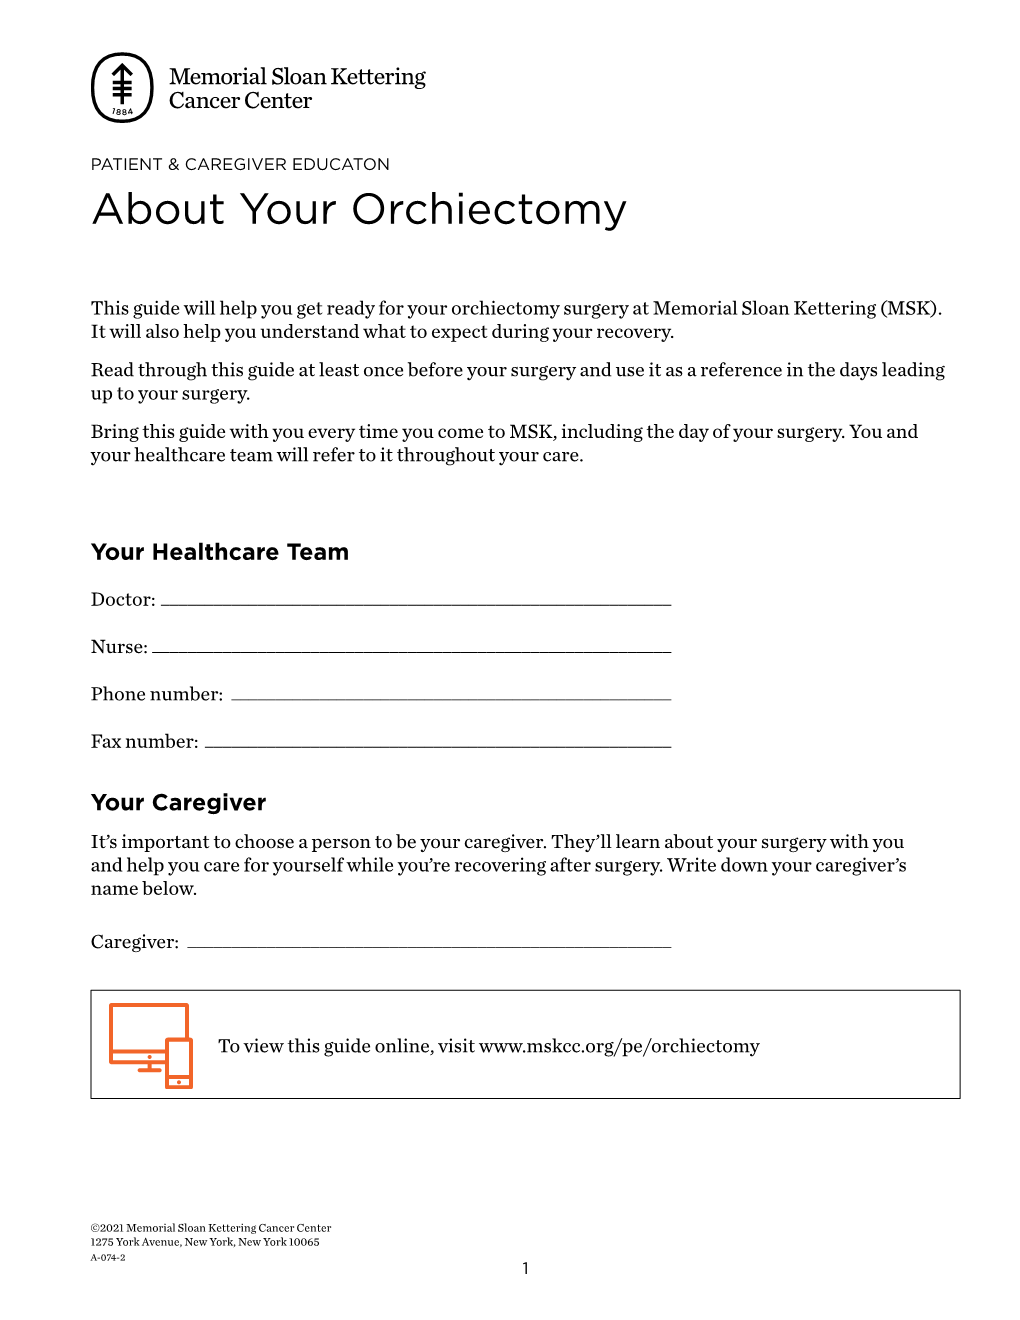 About Your Orchiectomy